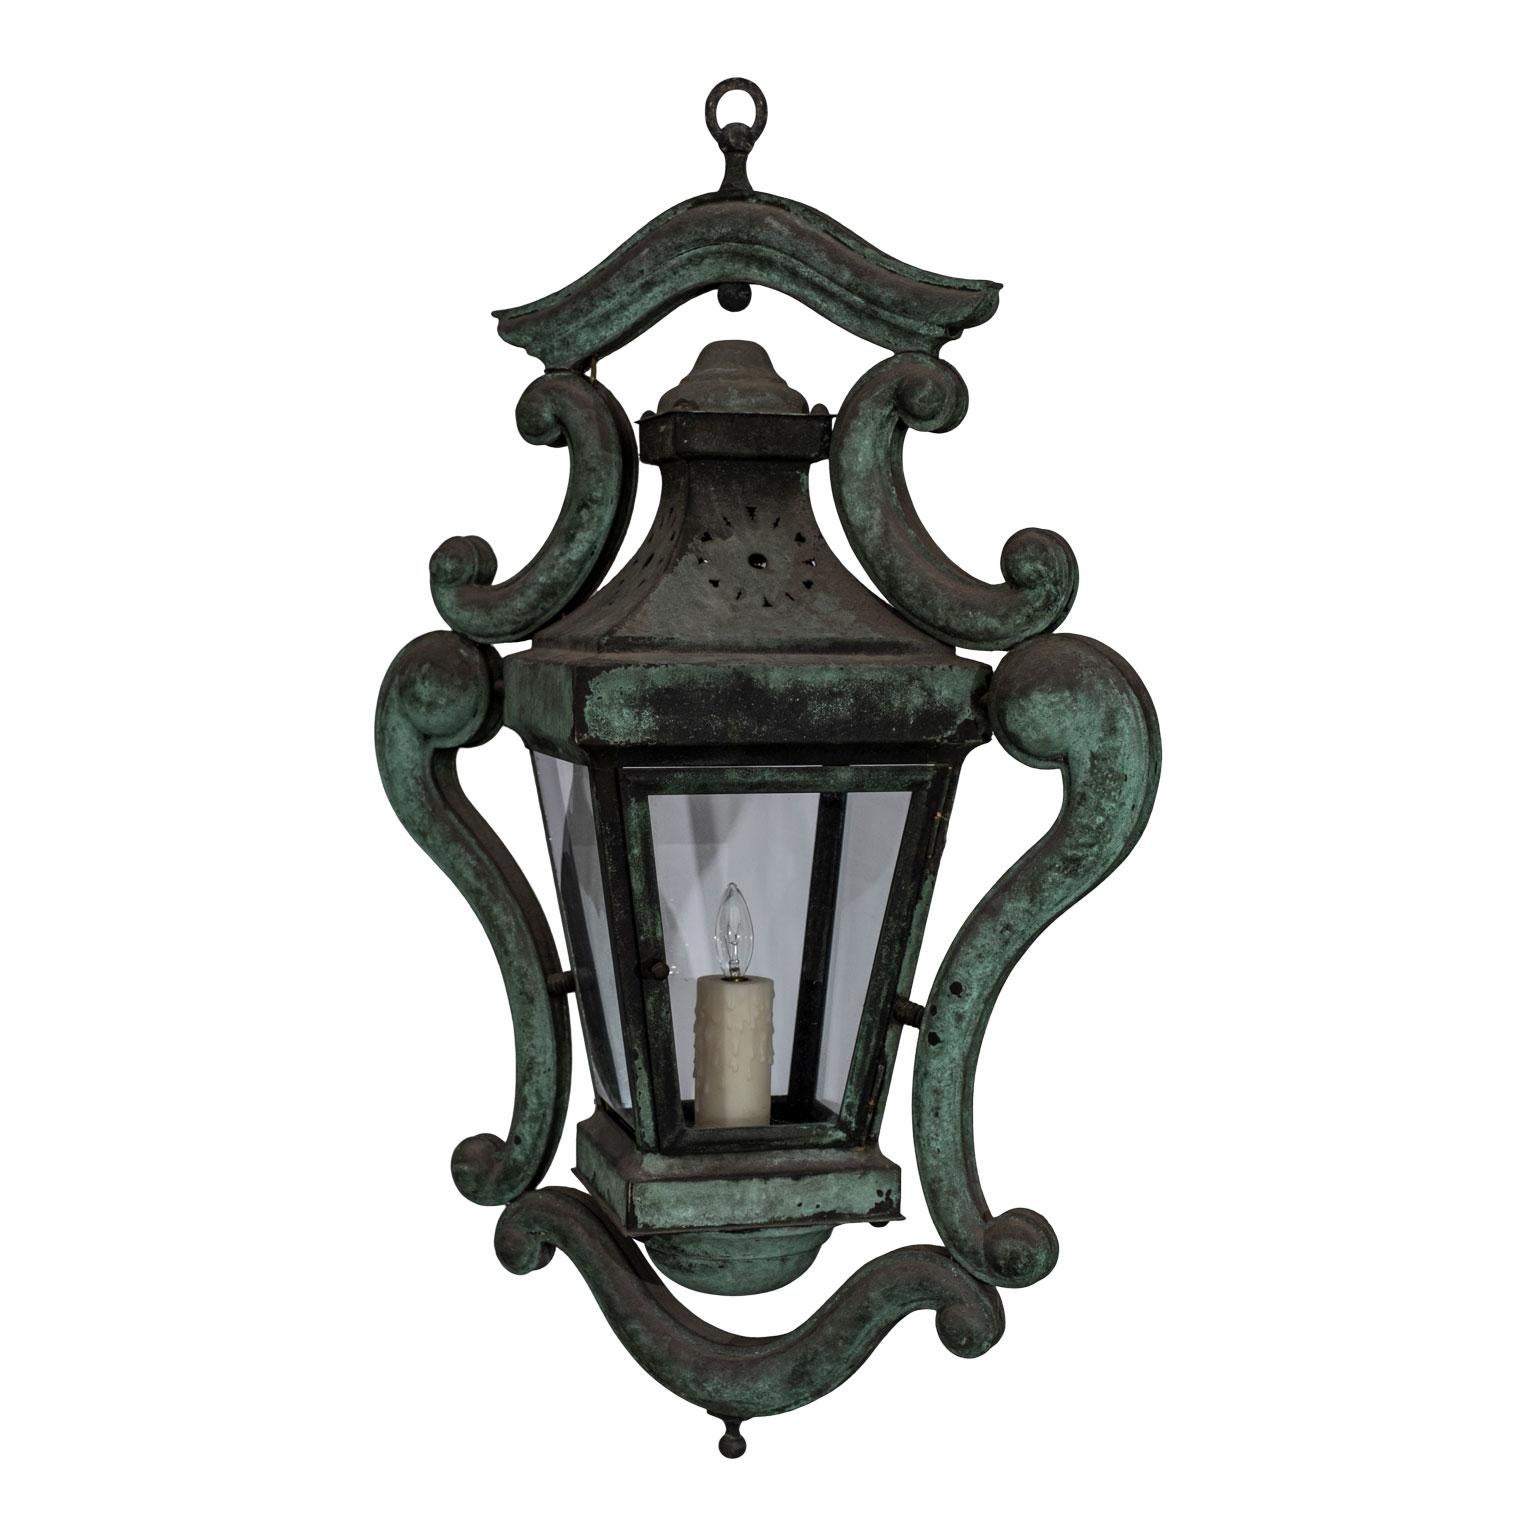 Decorative Italian Verdigris copper lantern, circa 1880-1920. Copper exterior over a heavy metal interior. Beautiful verdigris patina. Nice large scale. Newly wired for use within the USA (single candelabra-size sockets) using UL listed parts.